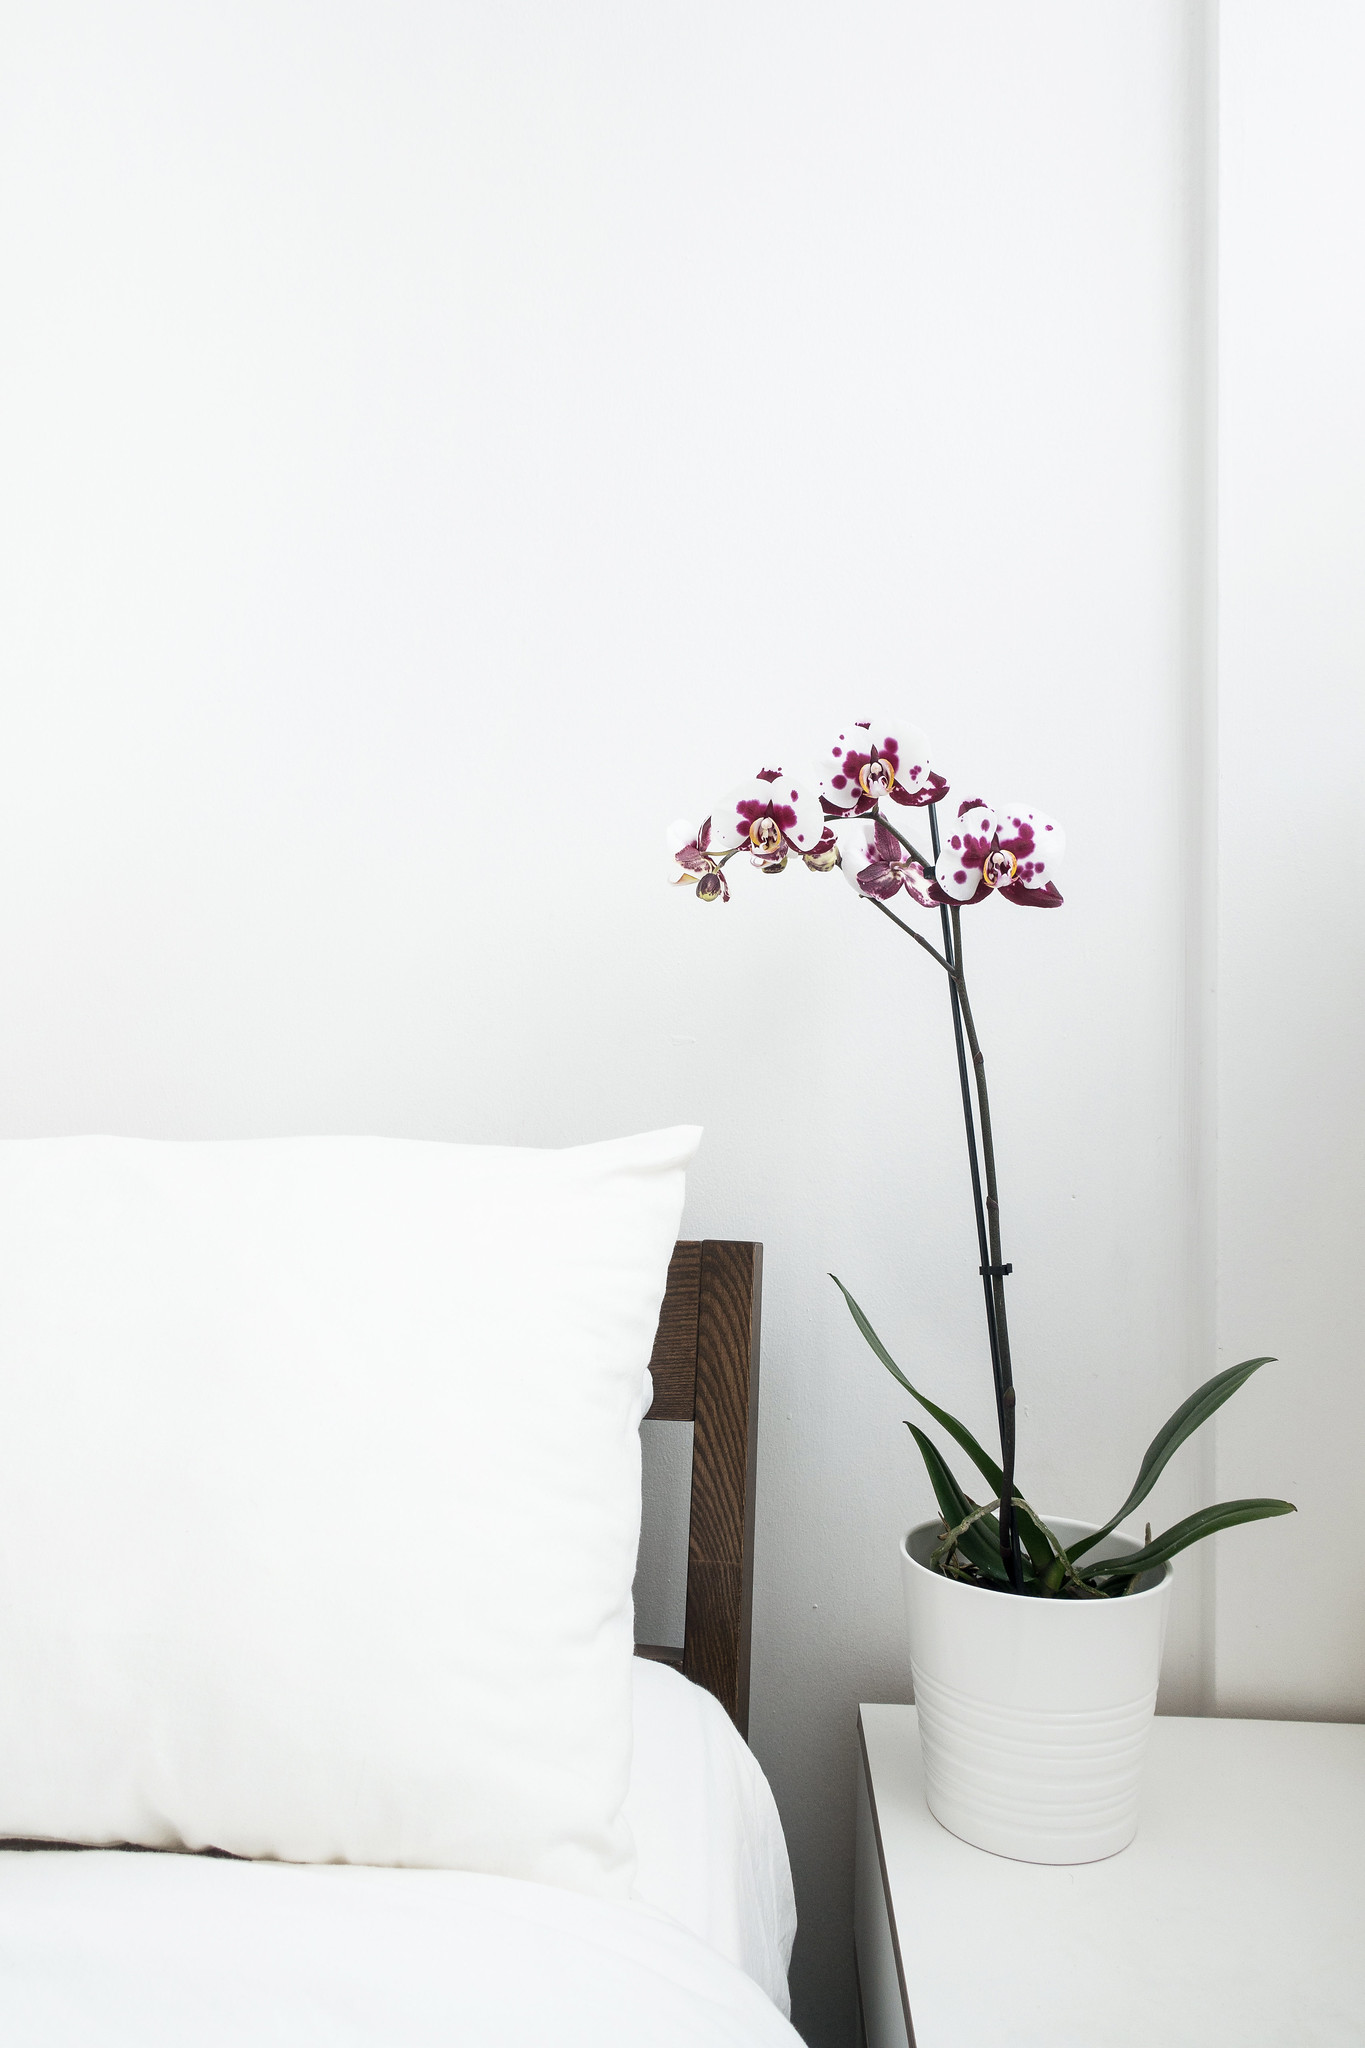 3 Common Misconceptions About Minimalism